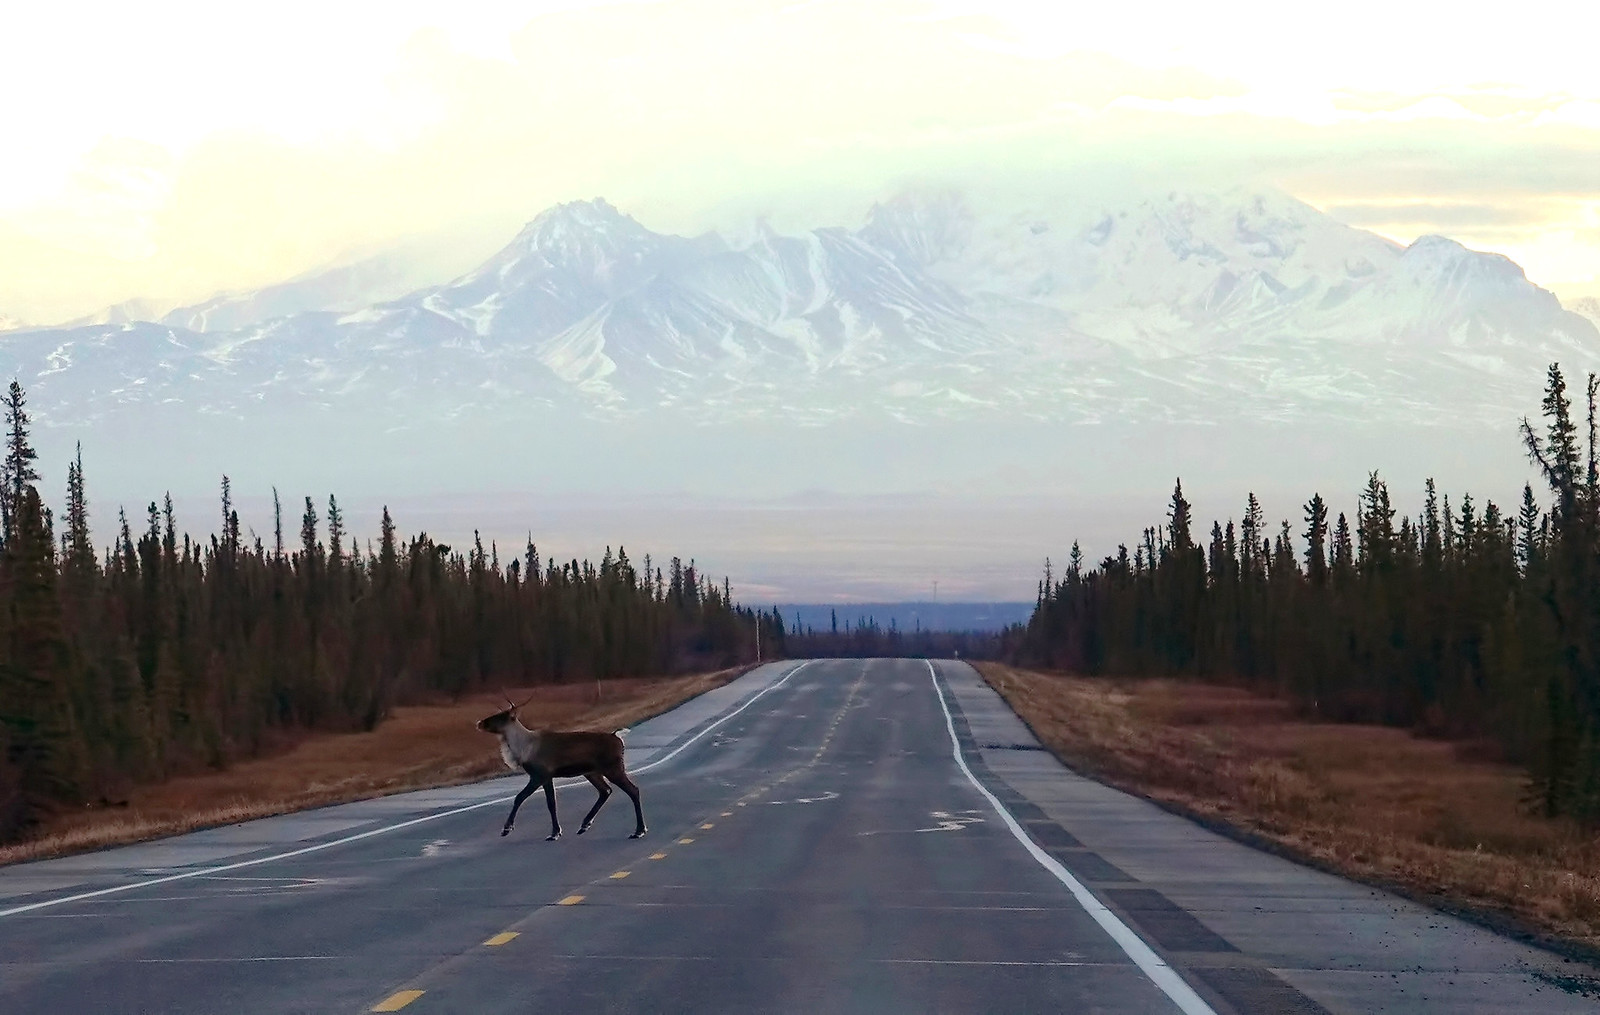 Bridging the gap: How the U.S. is starting to address wildlife-vehicle collisions